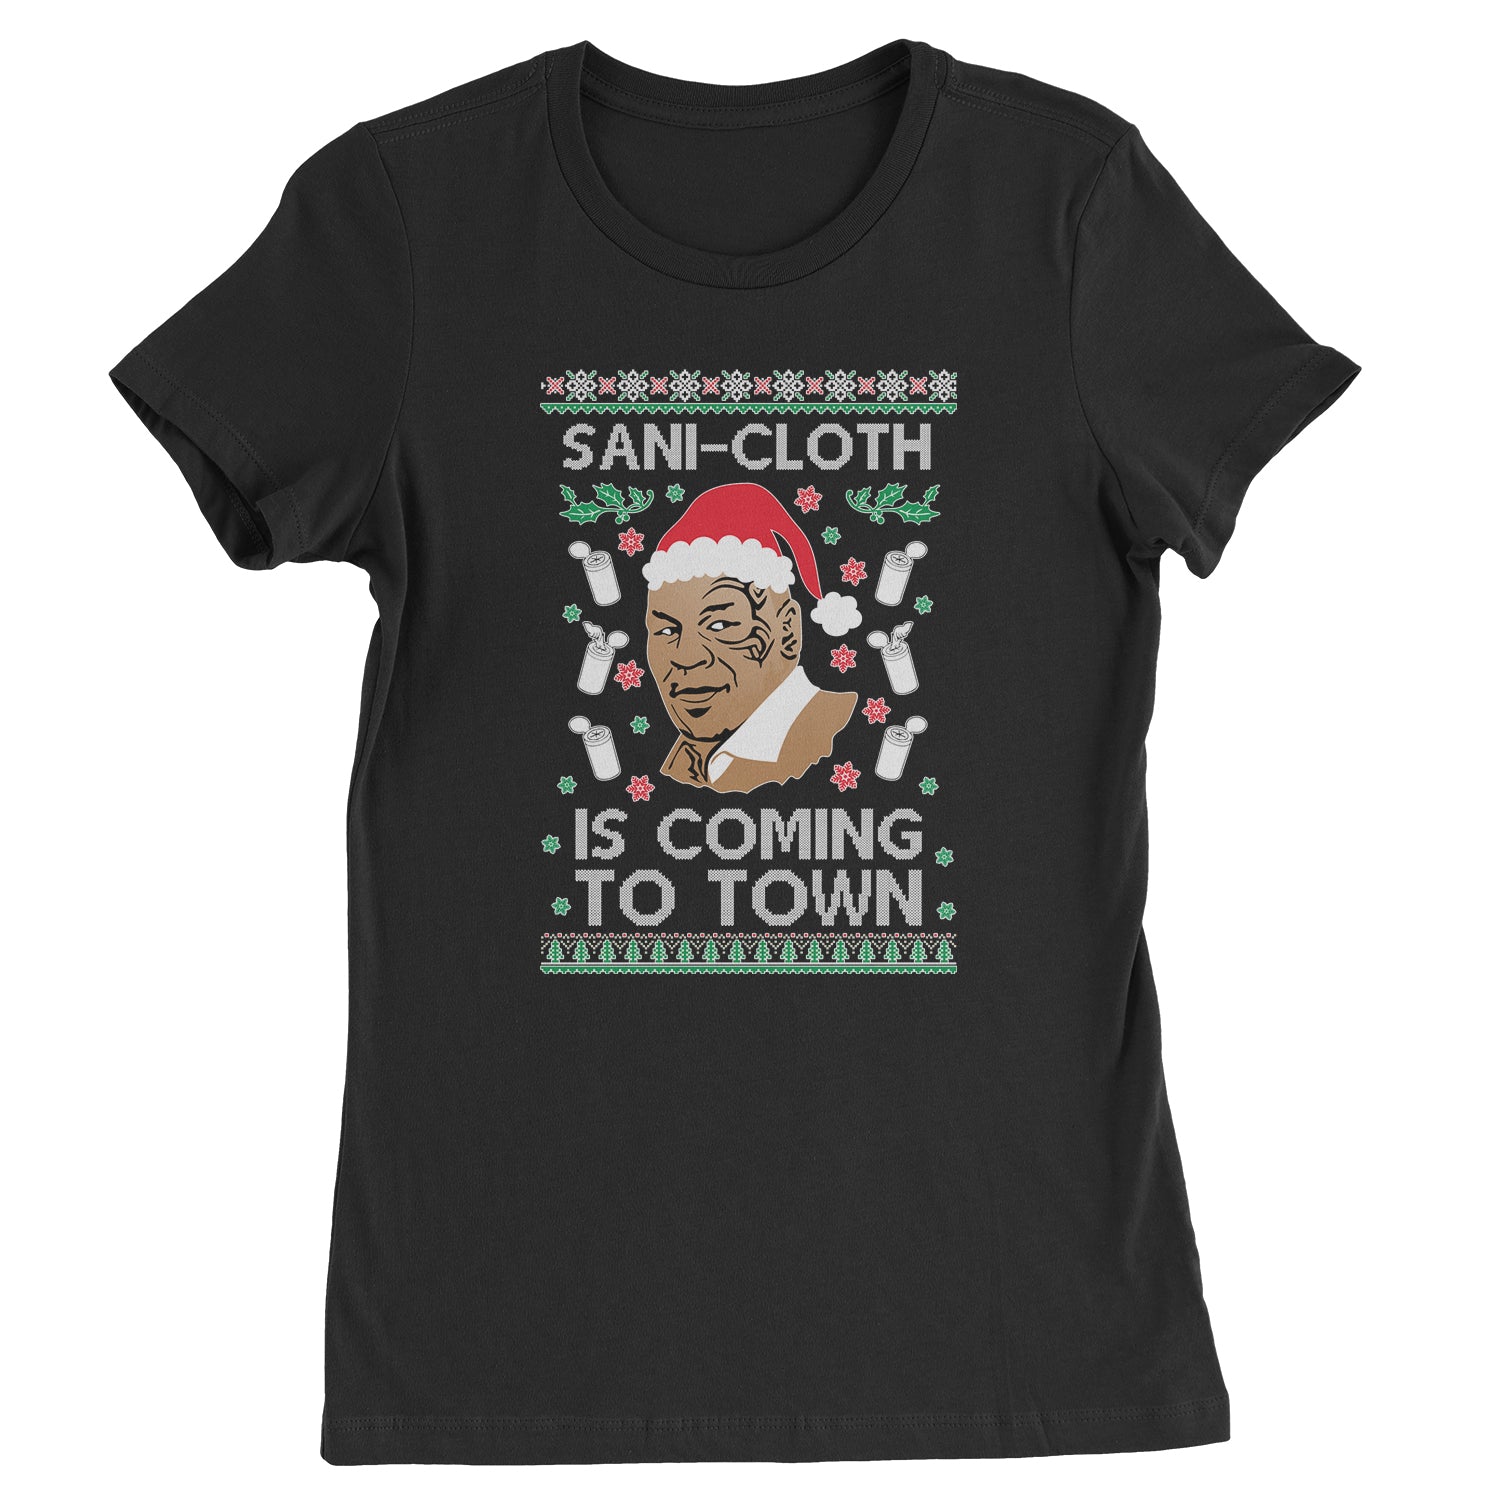 Sani-Cloth Is Coming To Town Ugly Christmas Womens T-shirt 2021, mike, miketyson, tyson by Expression Tees